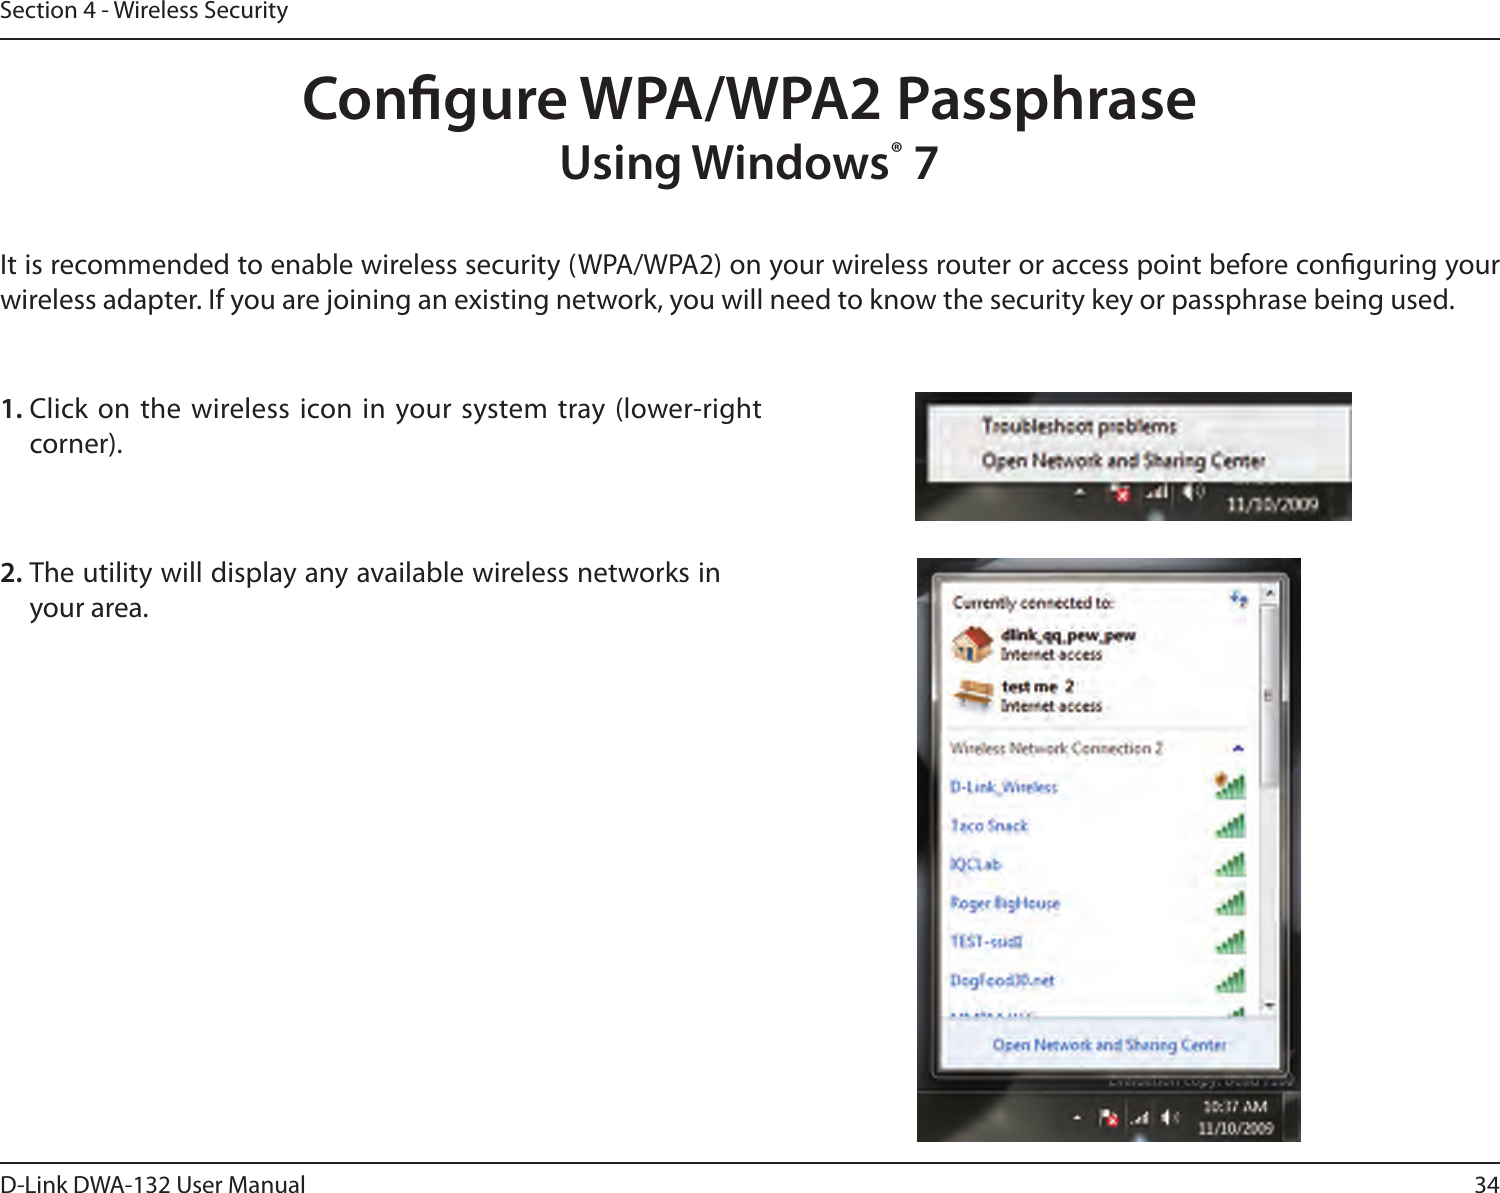 34D-Link DWA-132 User ManualSection 4 - Wireless SecurityCongure WPA/WPA2 PassphraseUsing Windows® 7It is recommended to enable wireless security (WPA/WPA2) on your wireless router or access point before conguring your wireless adapter. If you are joining an existing network, you will need to know the security key or passphrase being used.2. The utility will display any available wireless networks in your area.1. Click on the wireless icon in your system tray (lower-right corner).